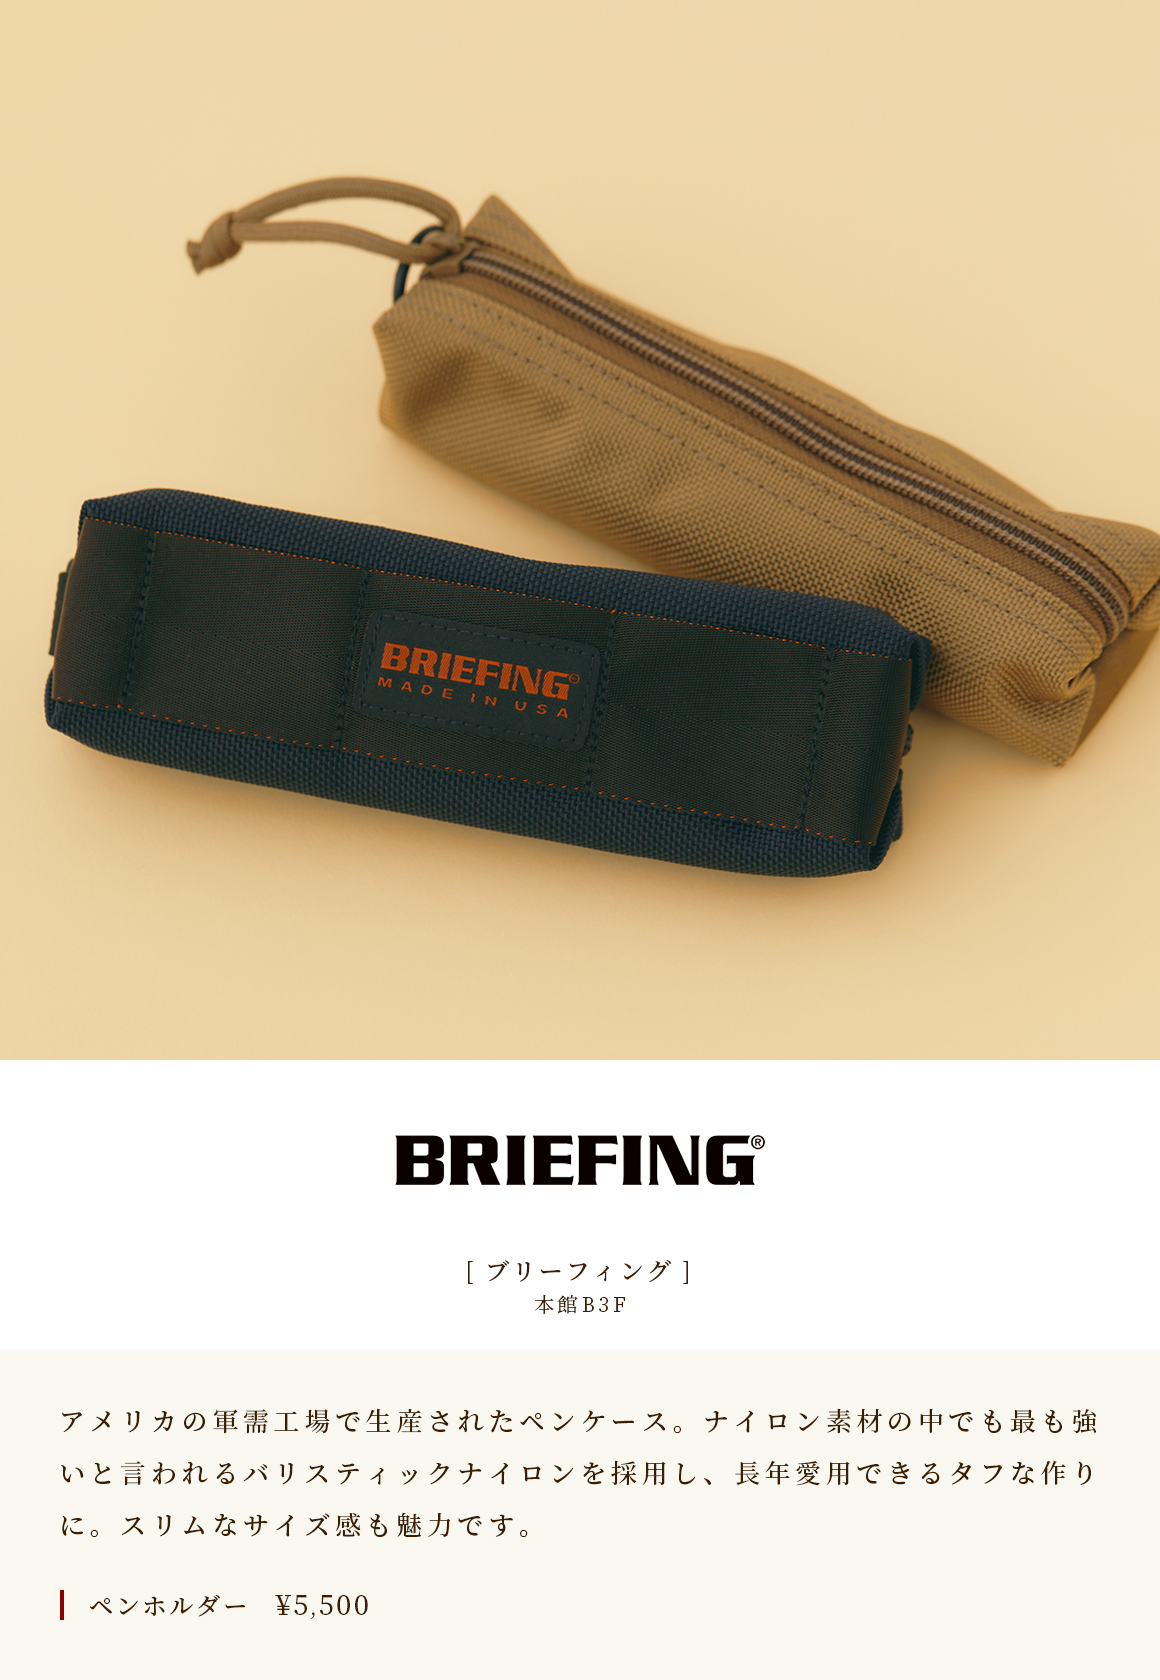 [BRIEFING] Main Building B3F A pen case produced at a military factory in the United States. Ballistic nylon, which is said to be the strongest of all nylon materials, is used to make it tough and can be used habitually for many years. The slim size is also attractive. Pen holder ￥ 5,500